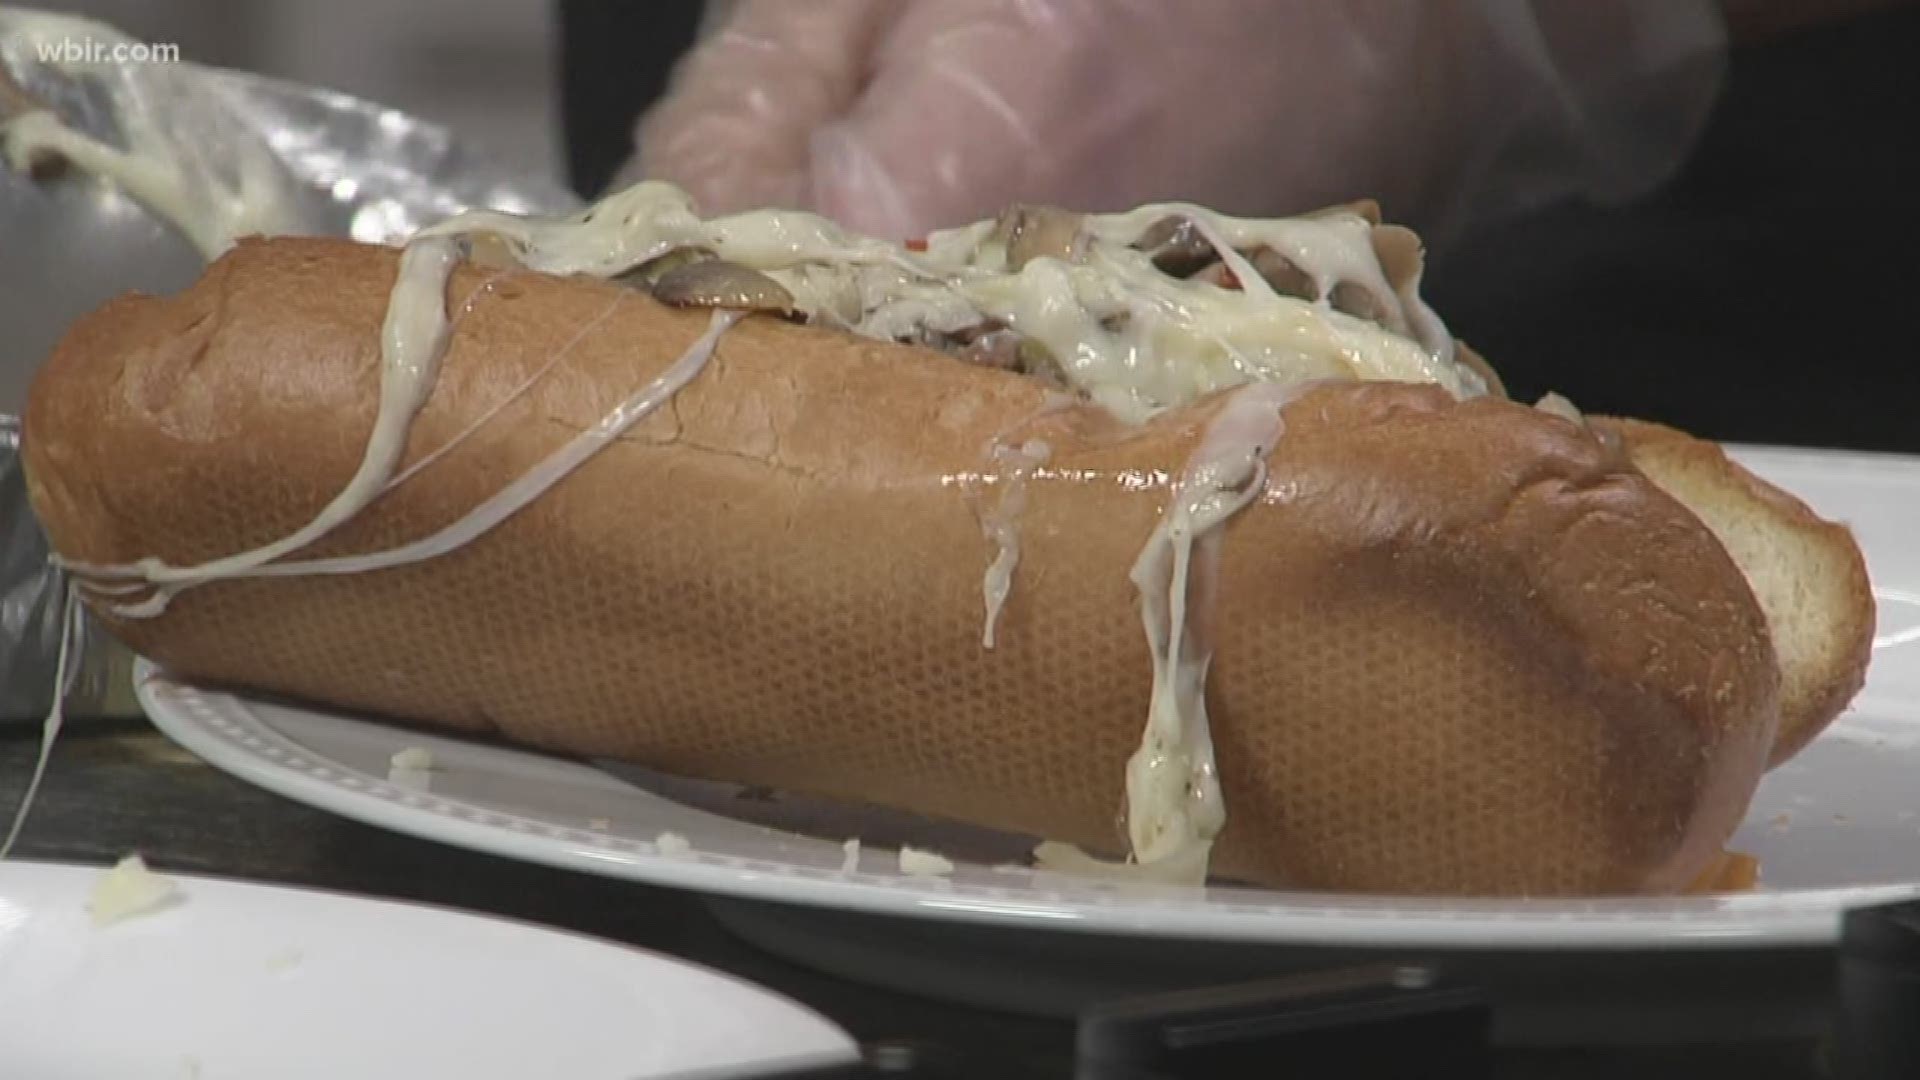 Jay with Metro Pizza in Alcoa skips the pizza to make one of their most famous sub sandwiches. Feb. 24, 2020-4pm.